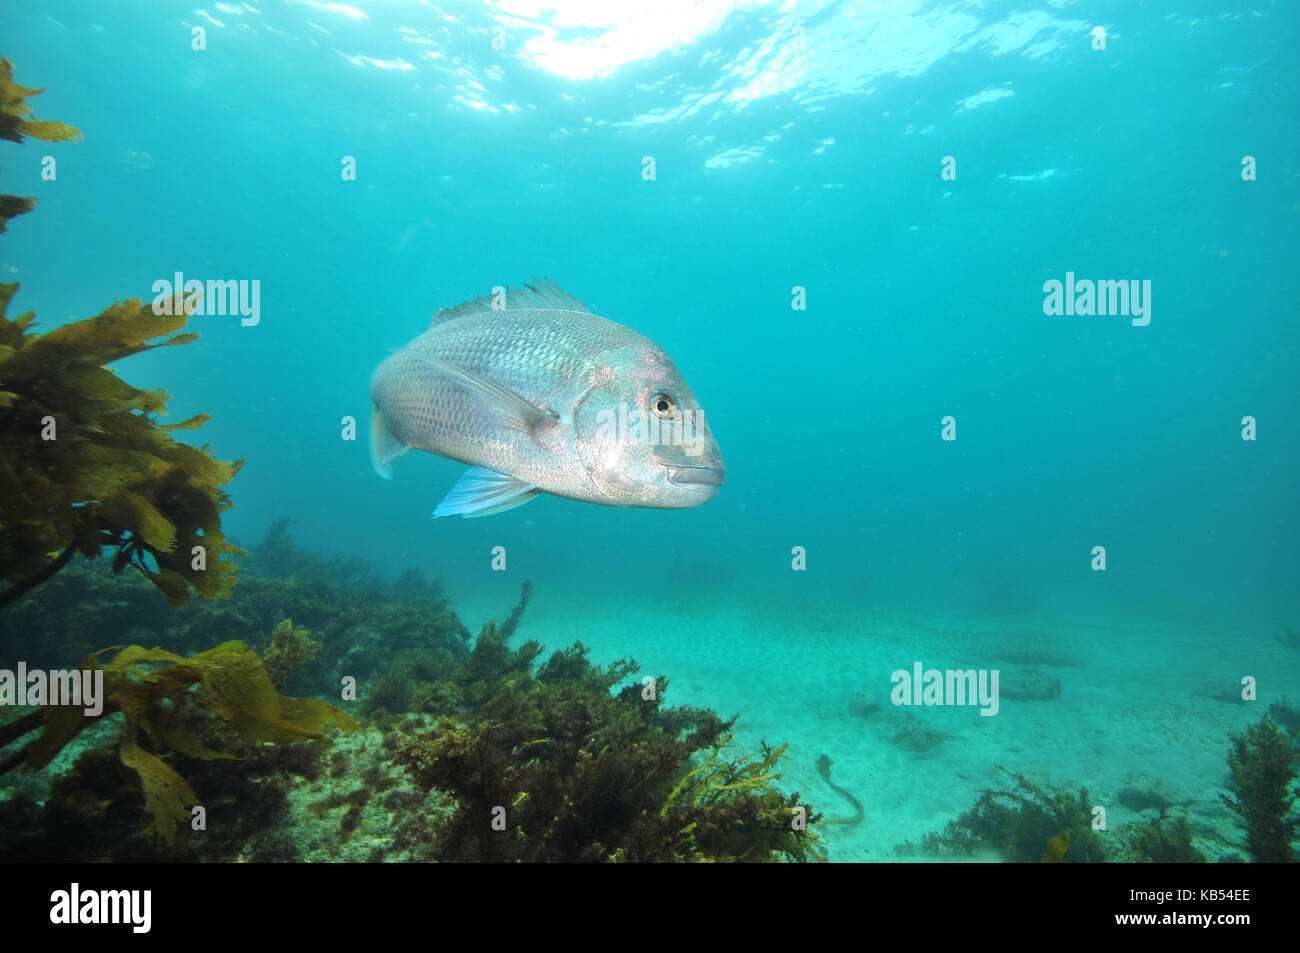 Large Australasian snapper Pagrus auratus turning in front of camera. Stock Photo